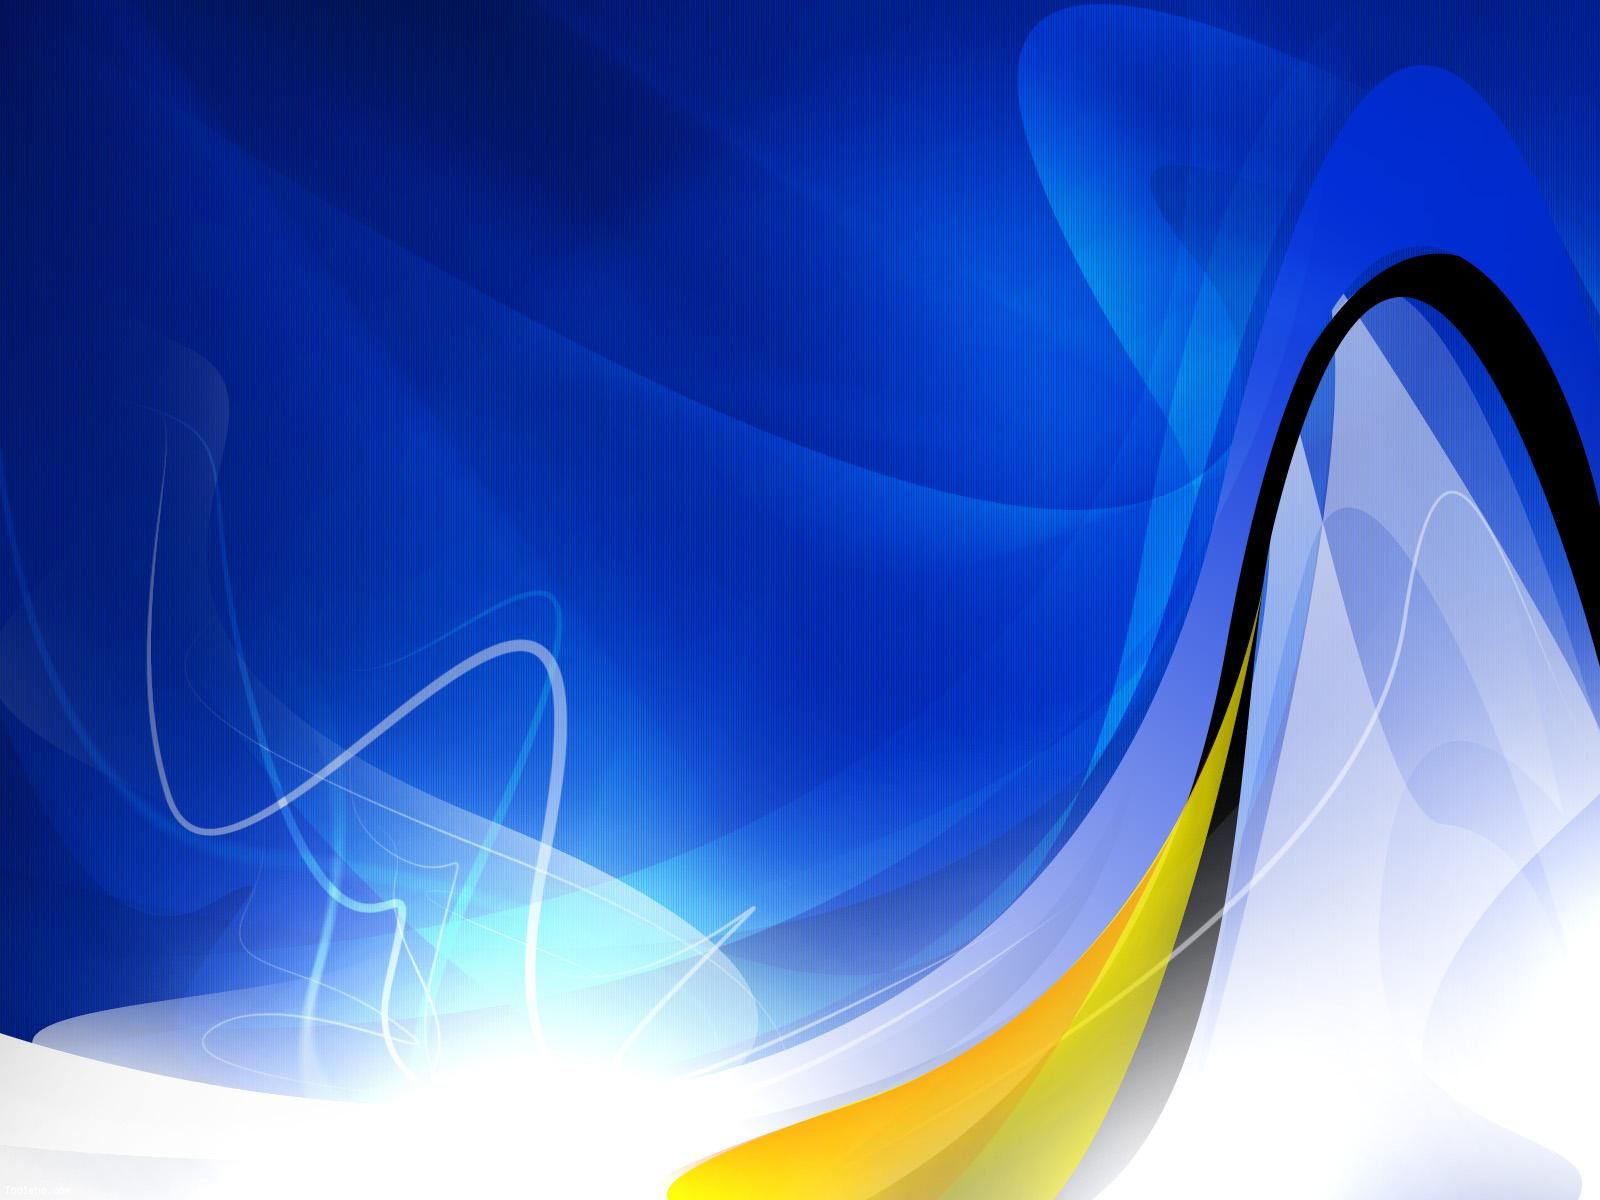 Royal Blue Abstract Background